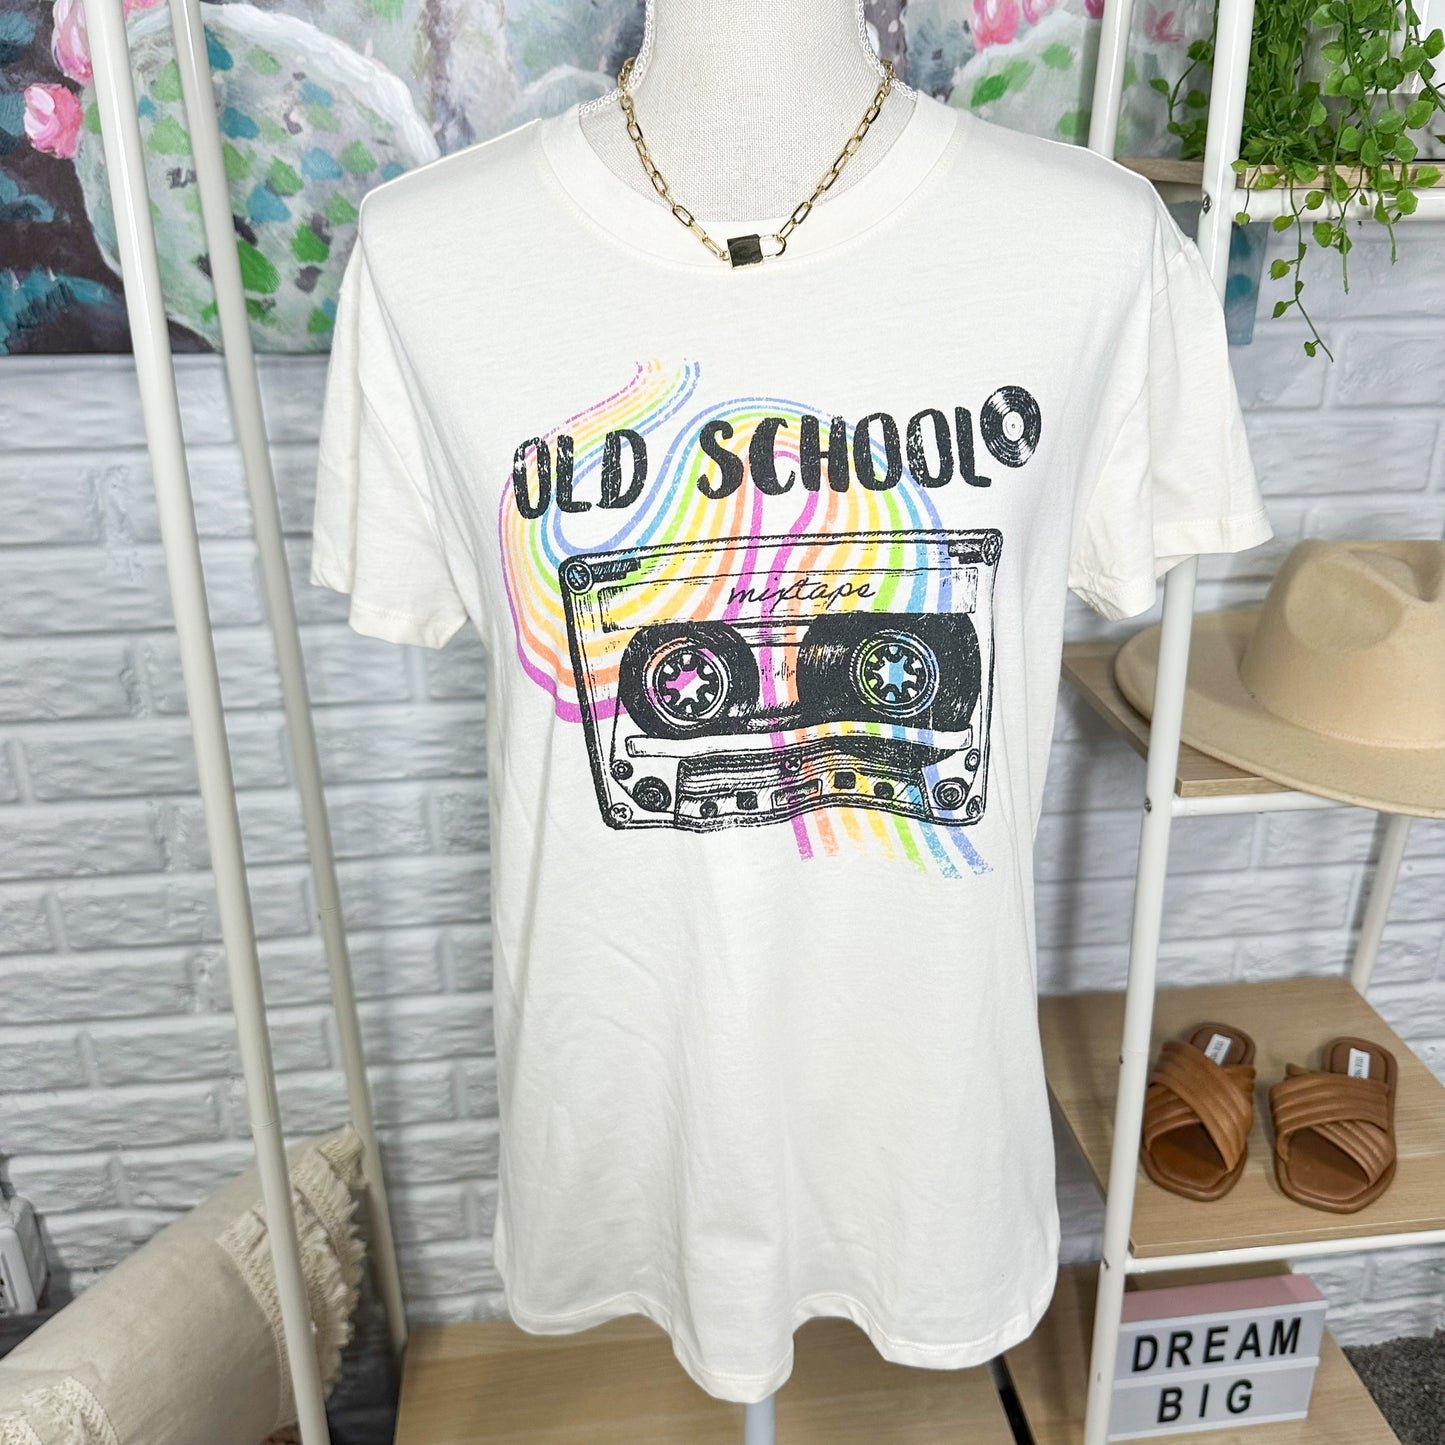 Maurice’s New Old School Graphic Tee Size Small